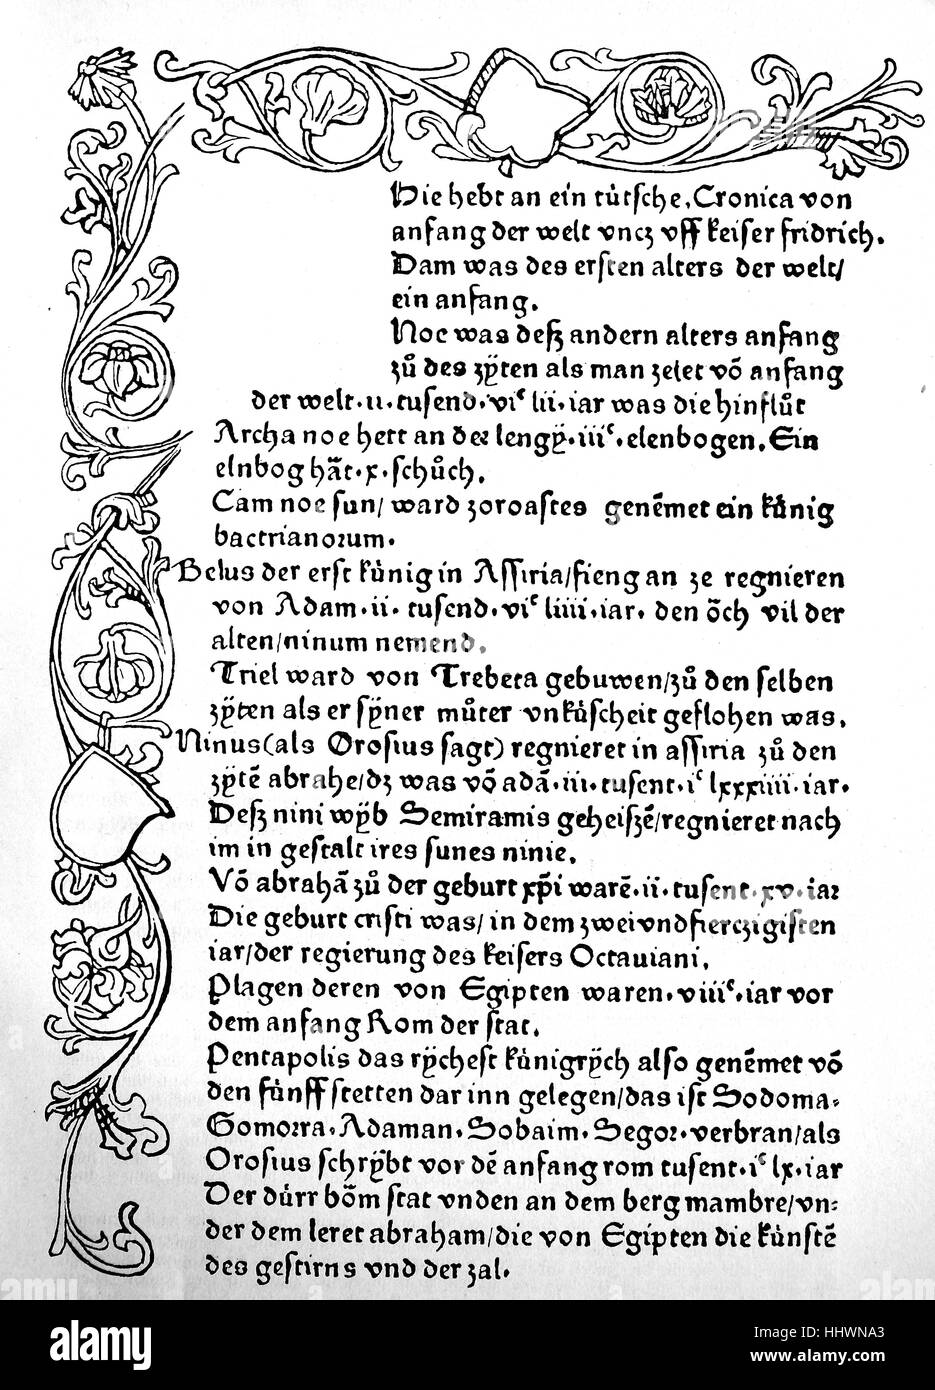 First page of the first printed edition, German World History, Deutsche Weltgeschichte, printed in Ulm 1473, Germany, historical image or illustration, published 1890, digital improved Stock Photo